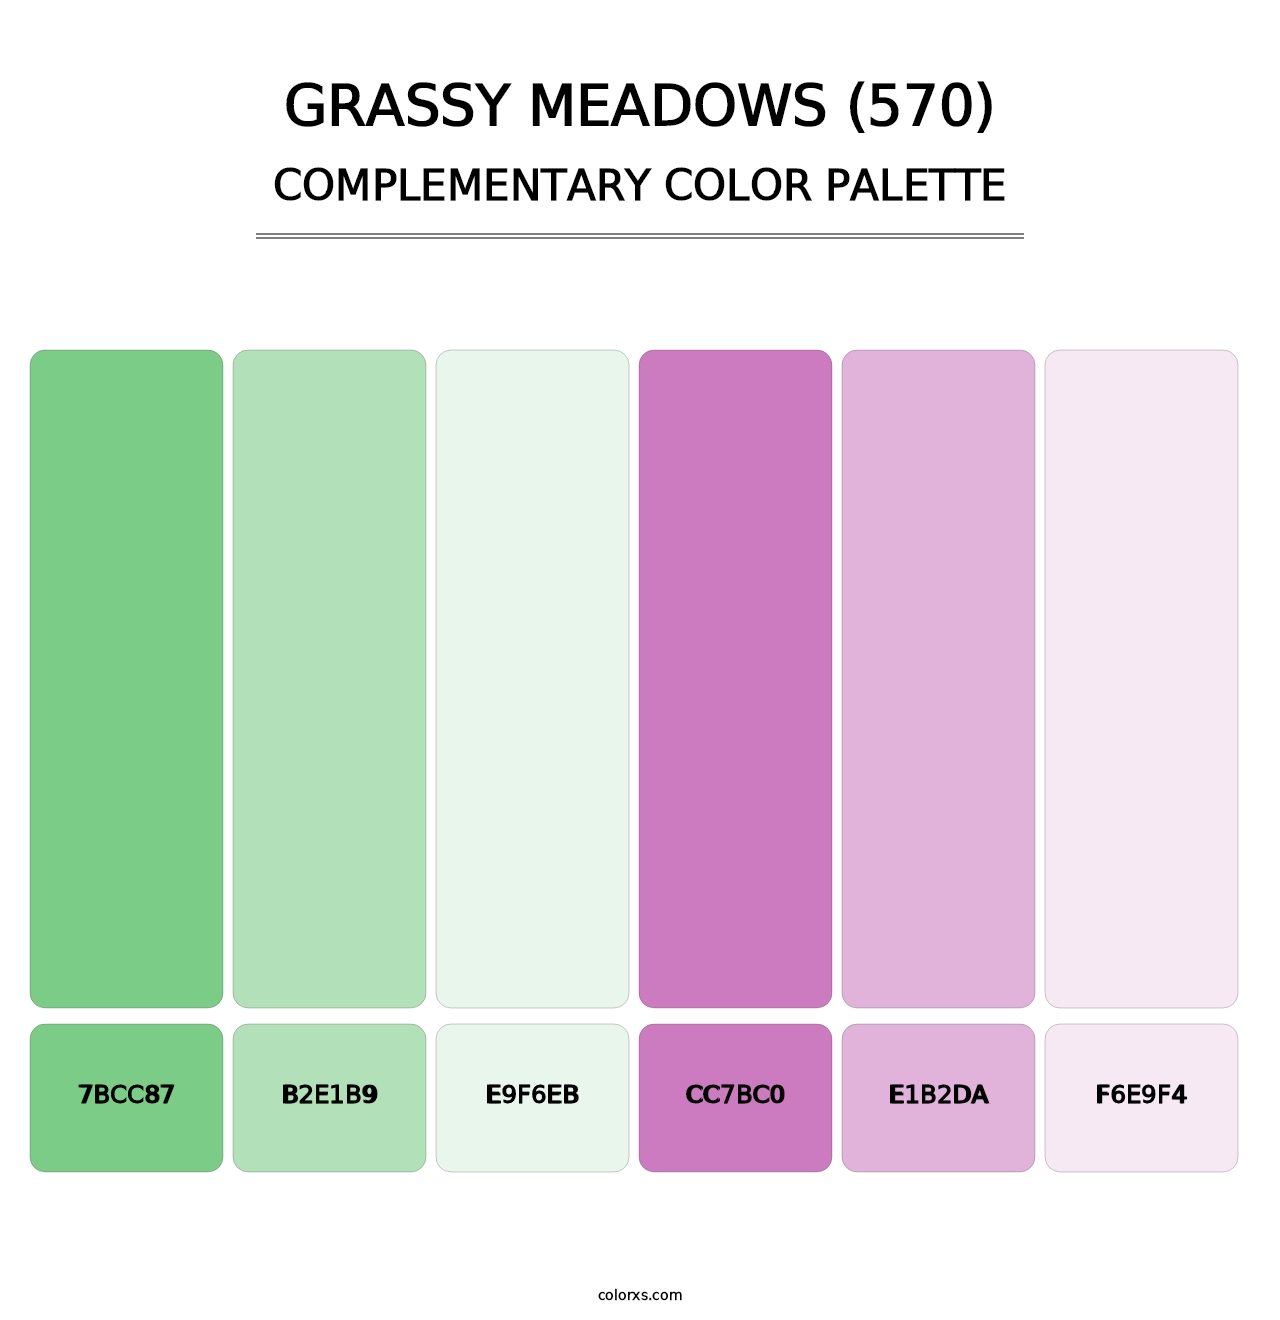 Grassy Meadows (570) - Complementary Color Palette